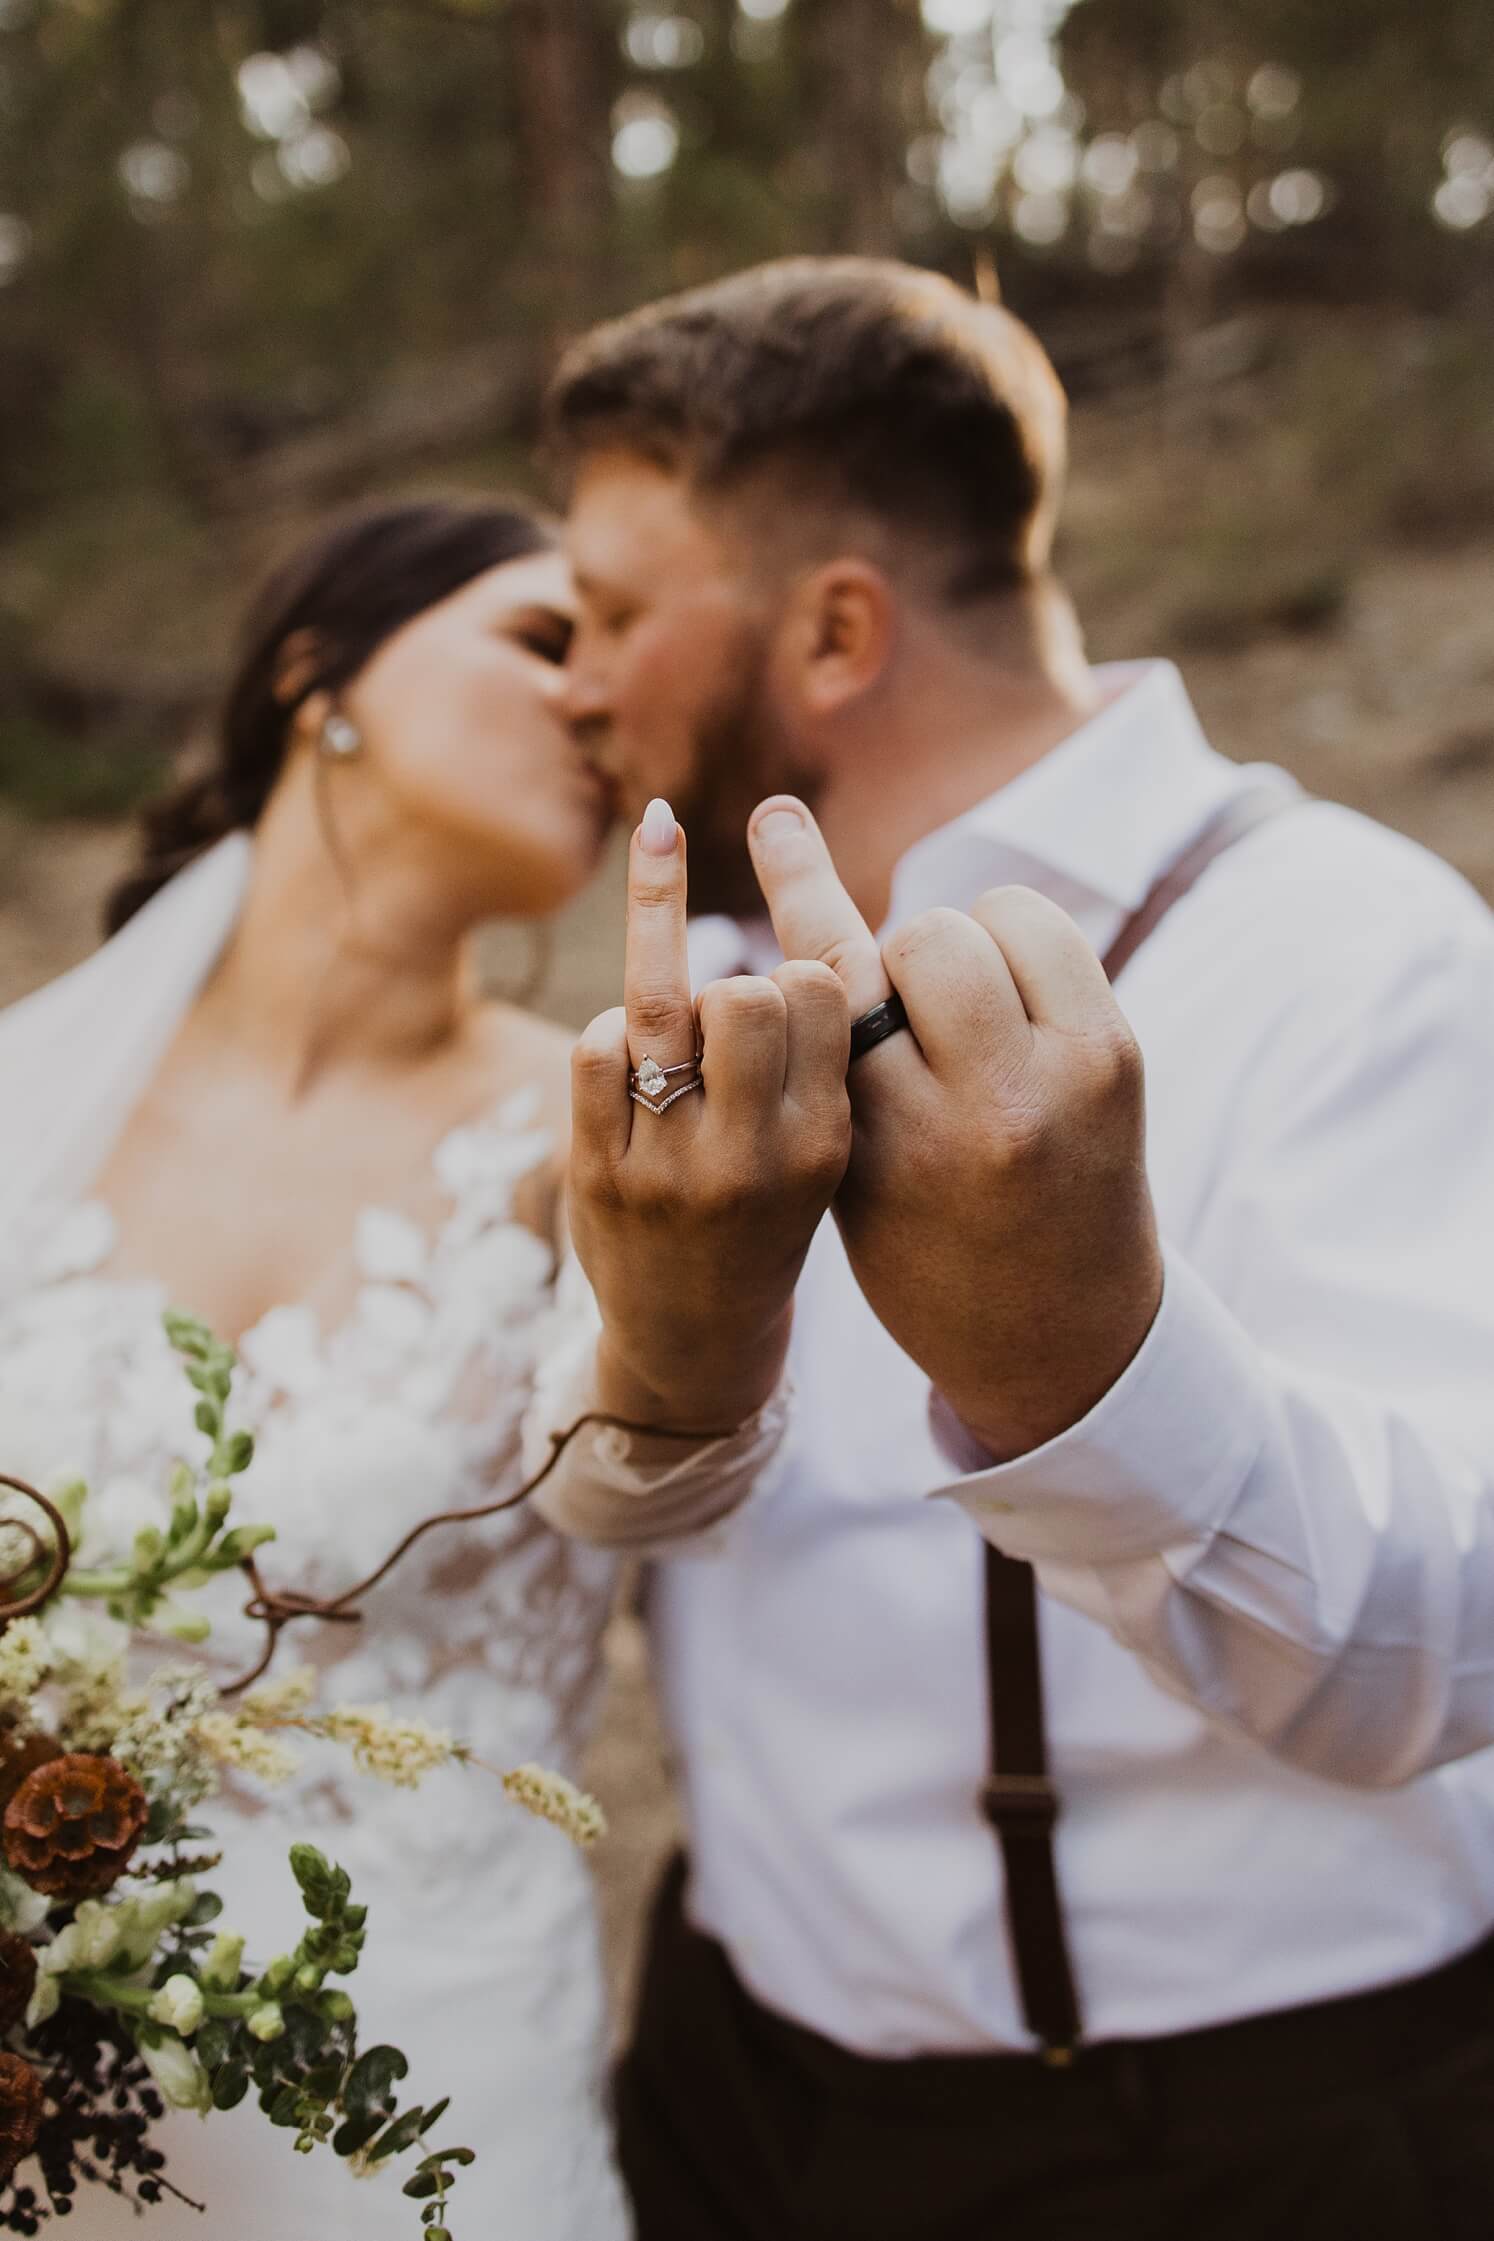 Bride and groom sticking up ring fingers and kissing at Evergreen wedding venue | McArthur Weddings and Events